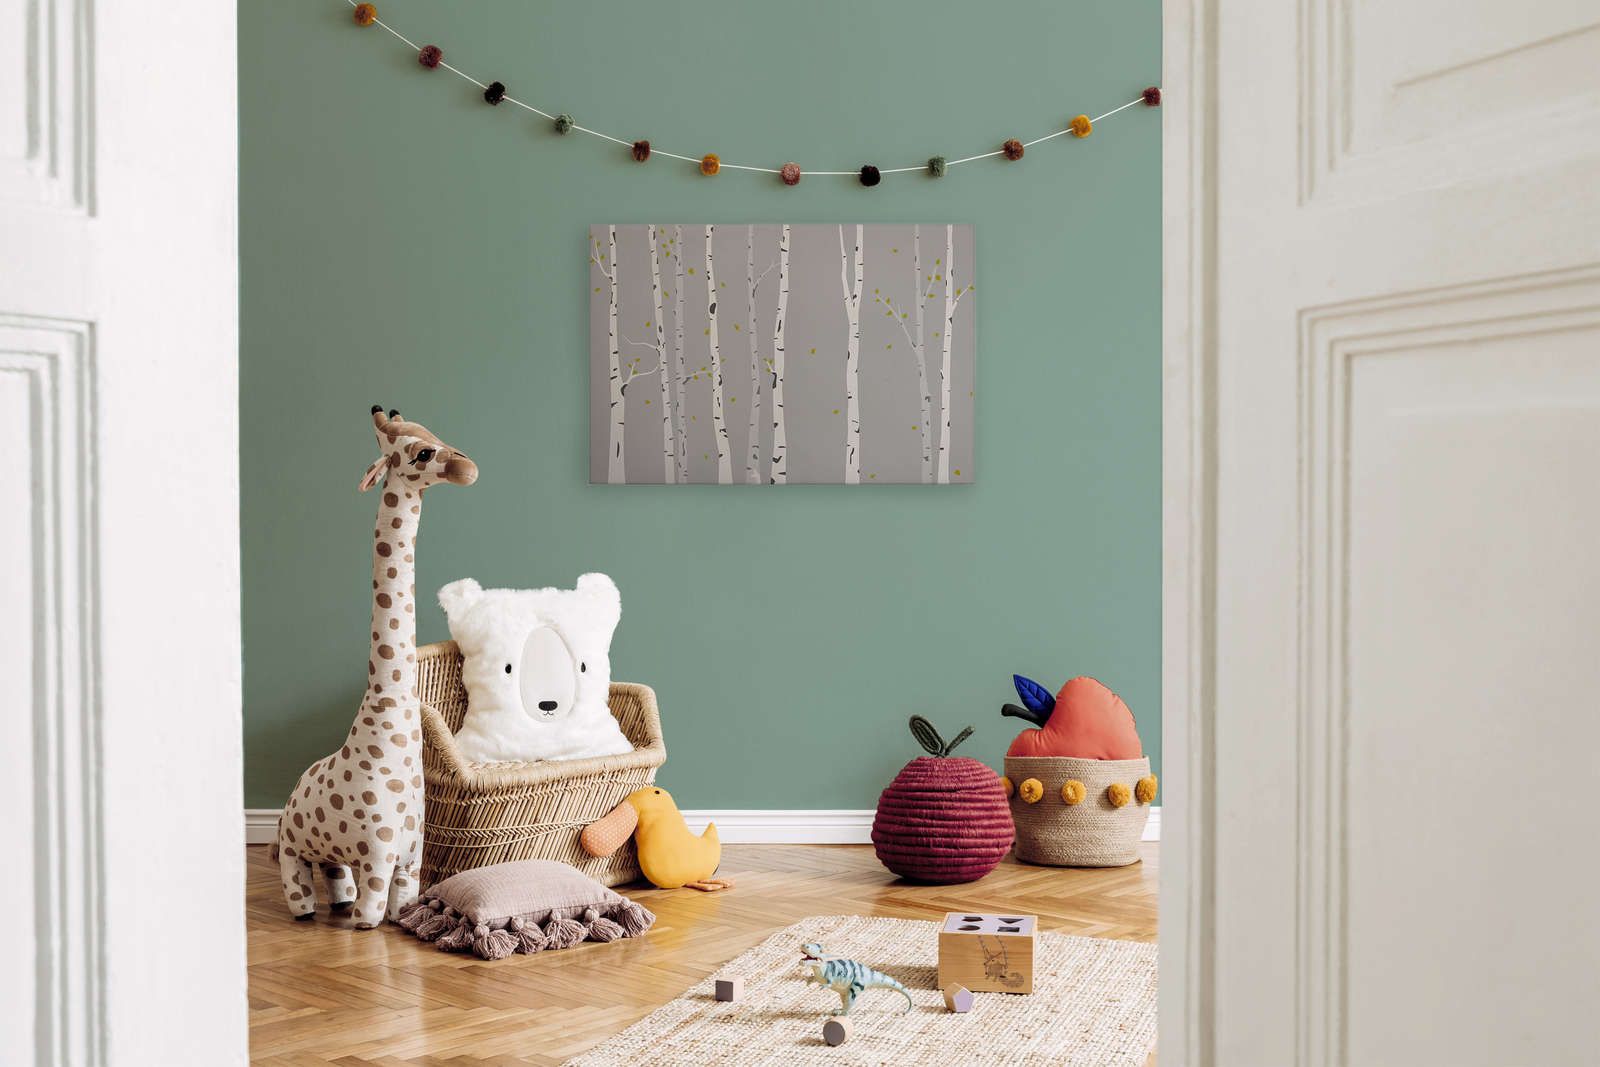             Canvas with painted birch forest for children's room - 90 cm x 60 cm
        